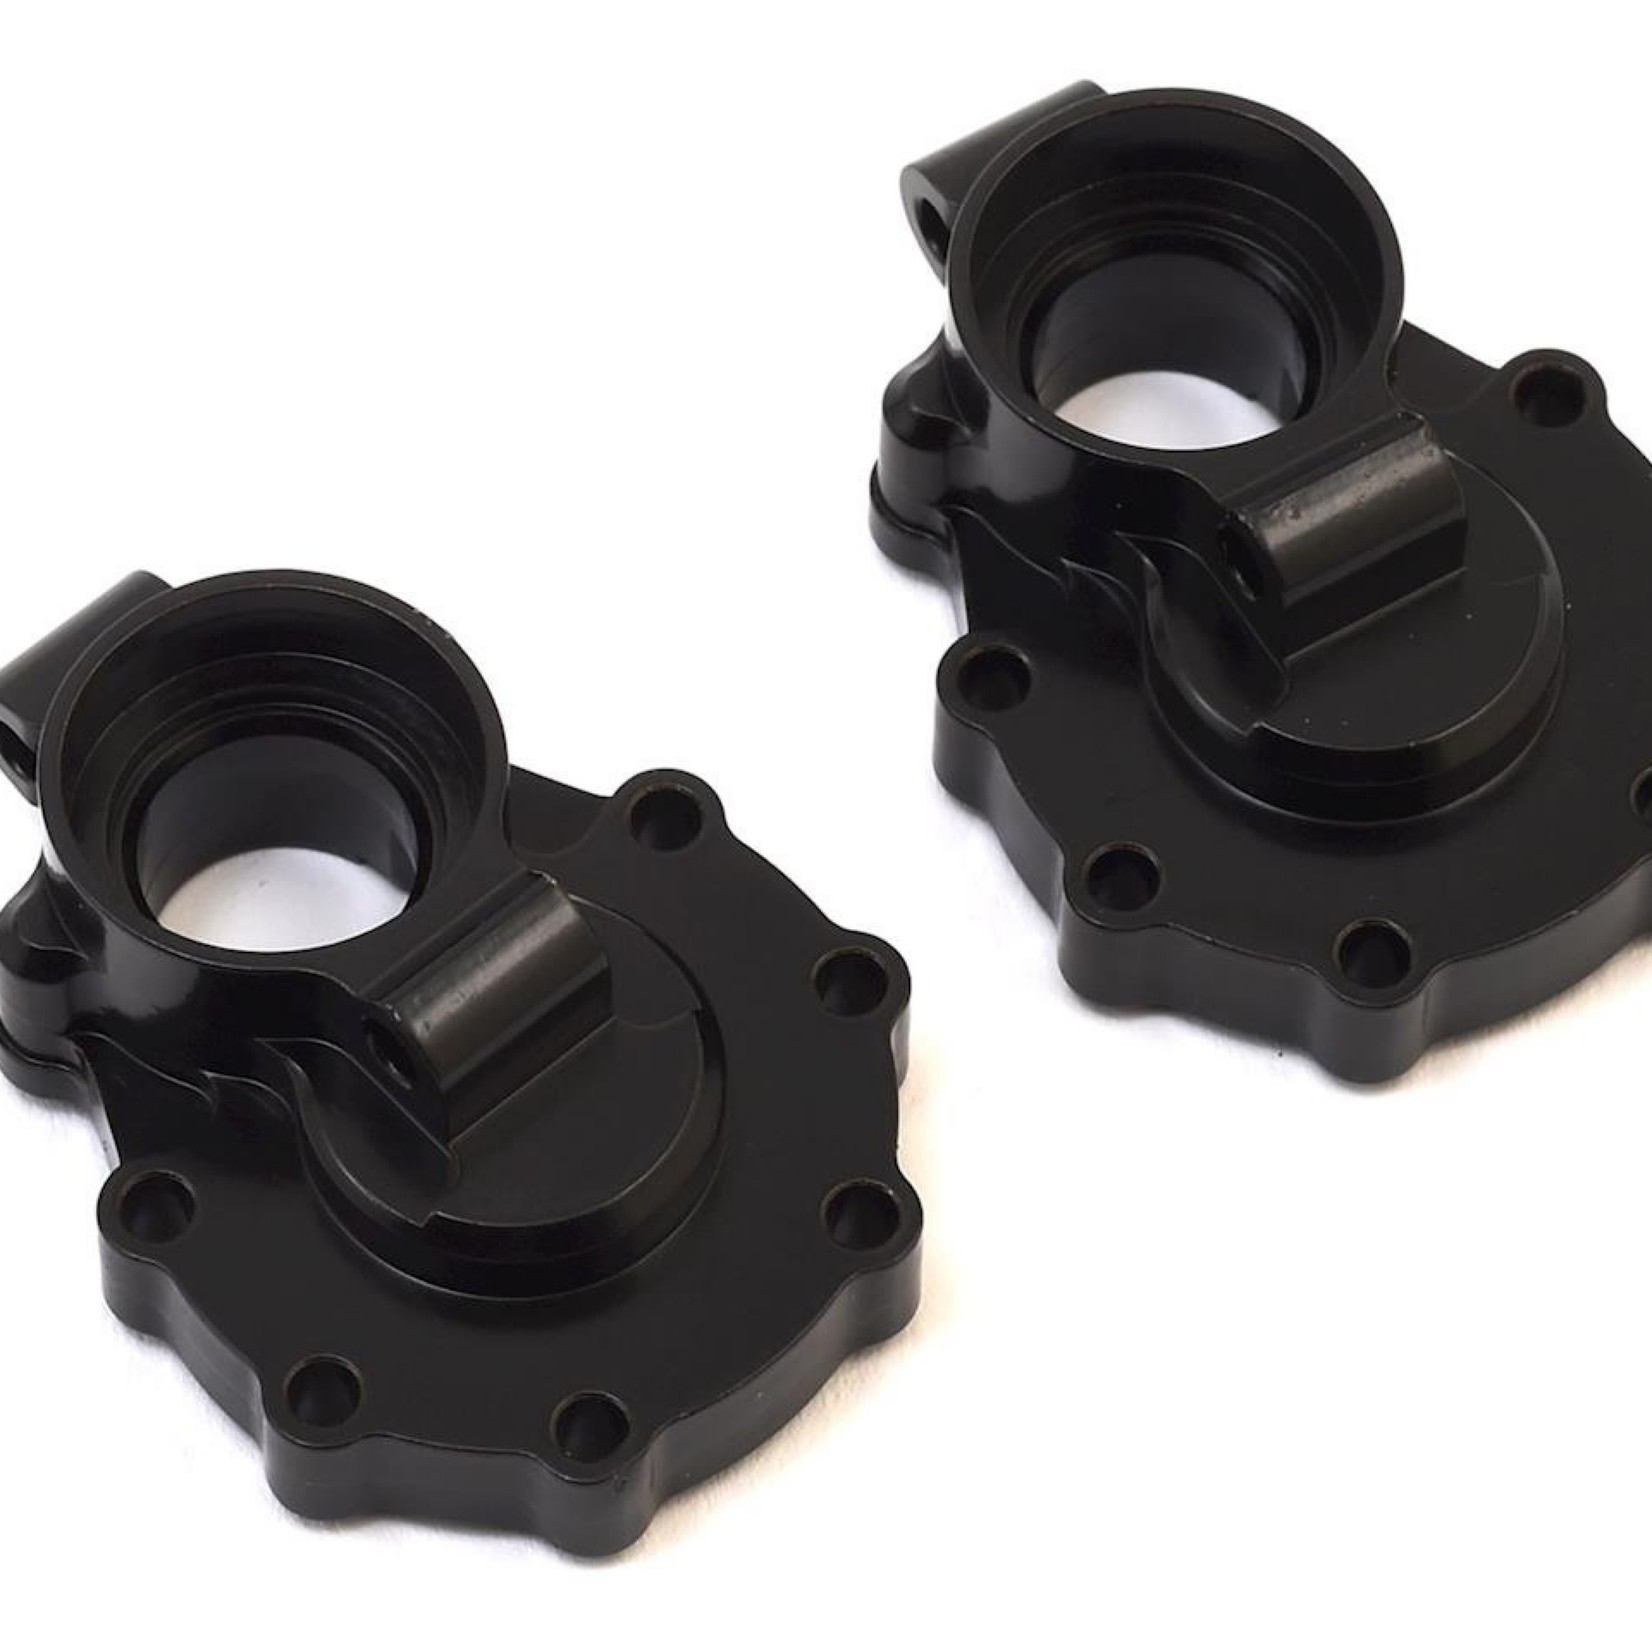 ST Racing Concepts ST Racing Concepts Traxxas TRX-4 Brass Rear Inner Portal Drive Housing (Black)  #ST8253BR